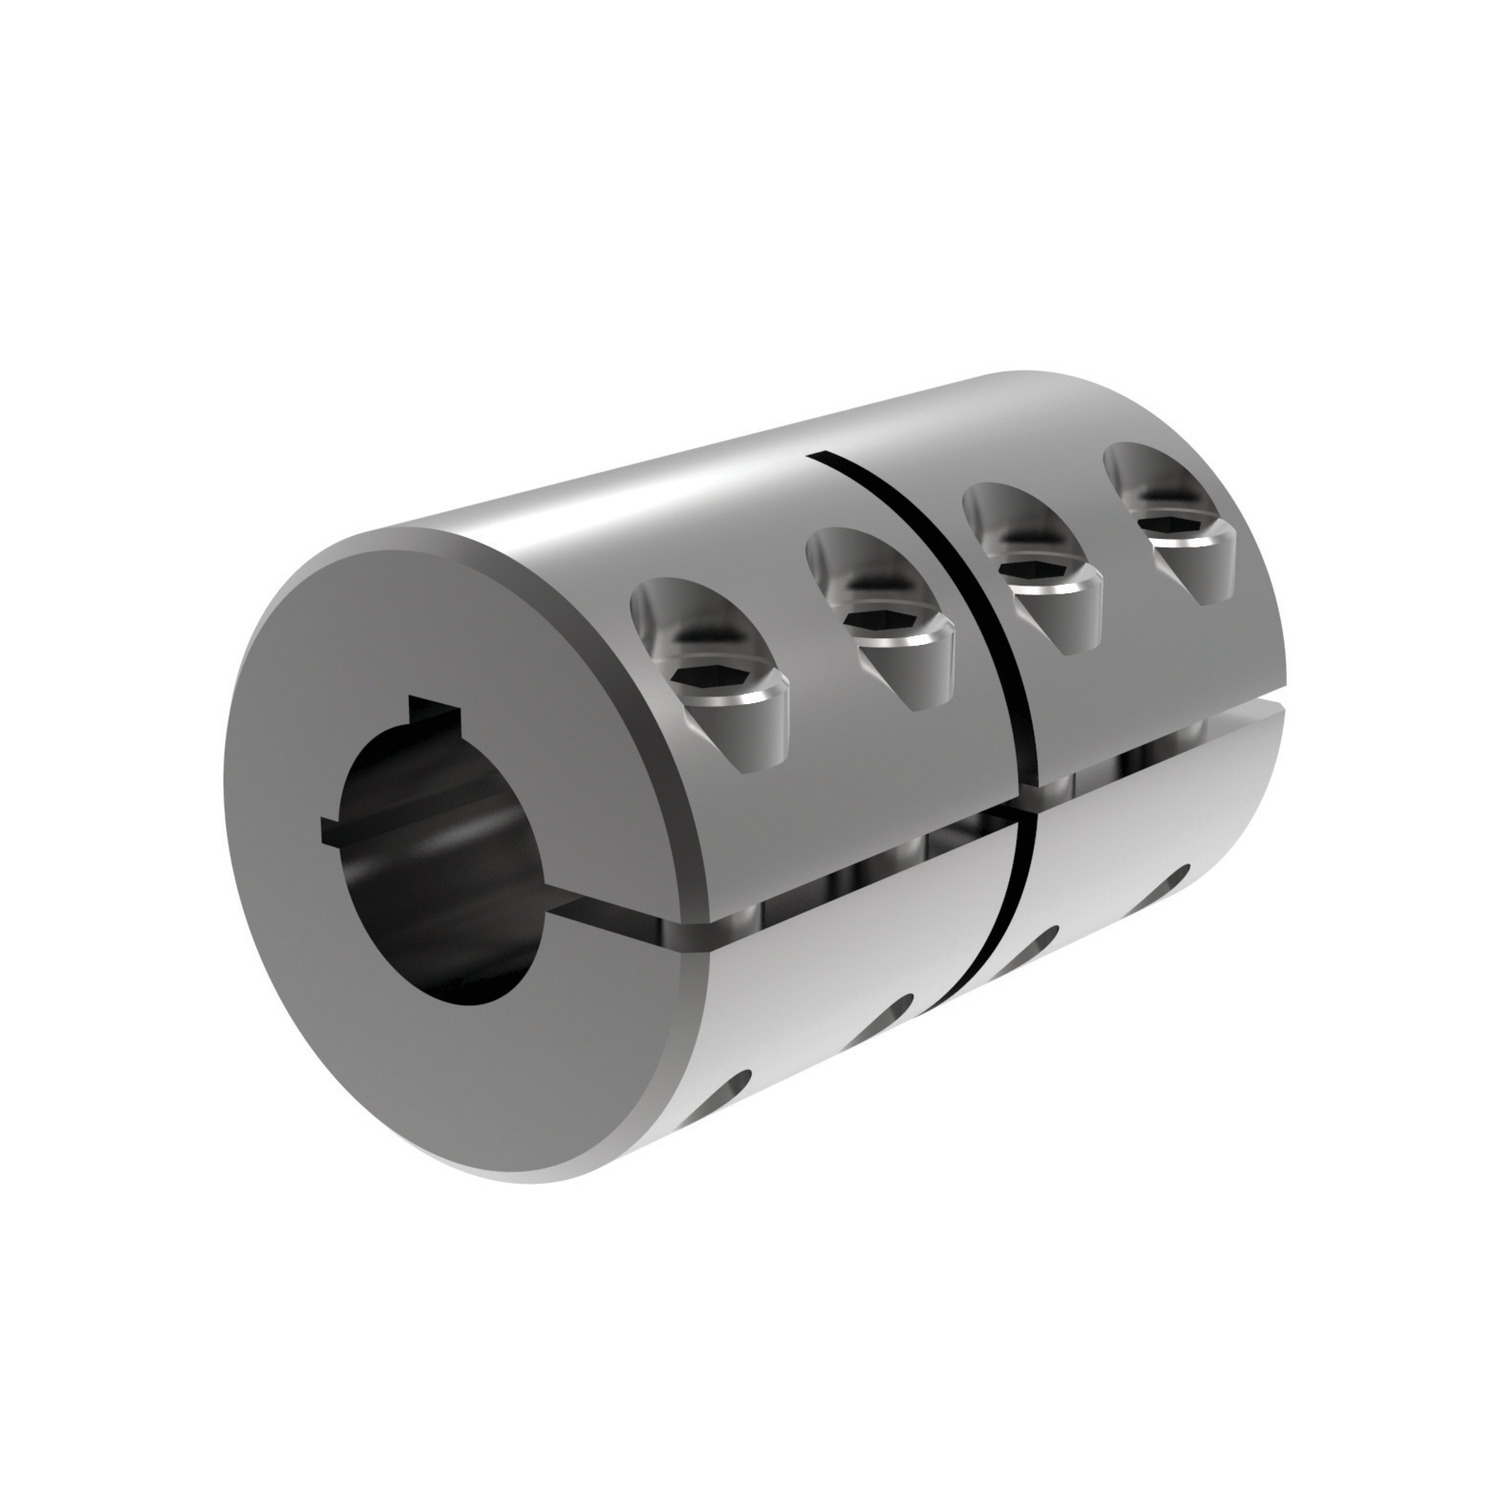 Rigid Shaft Couplings Rigid shaft couplings available in one piece and two piece designs in stainless steel or aluminium.